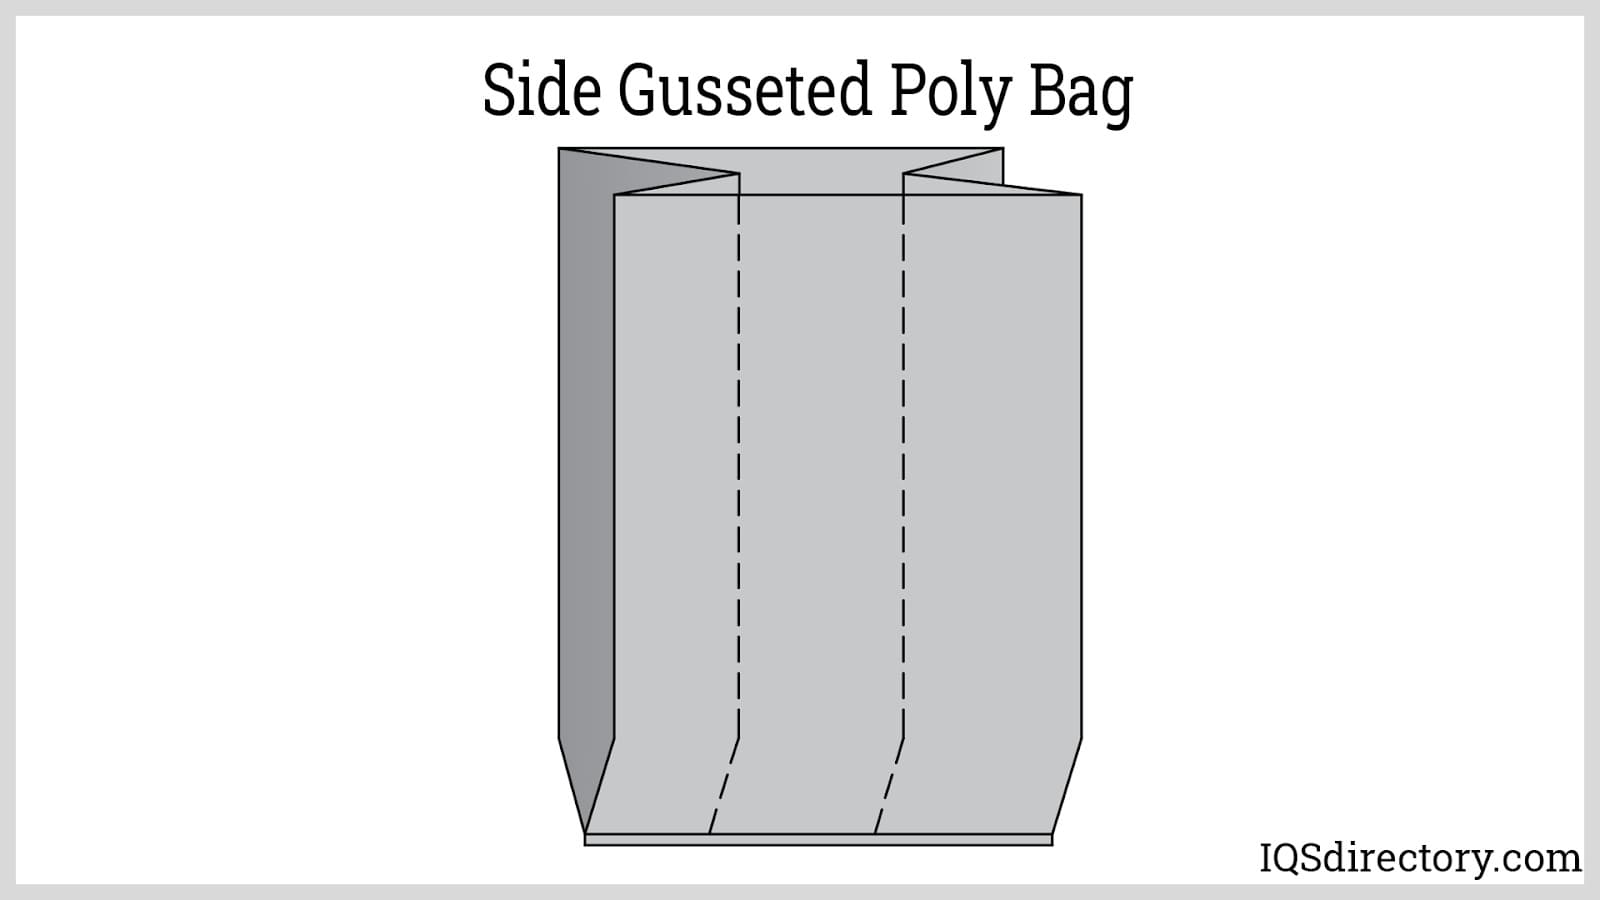 Large Plastic Bags, Large Size Flat Poly Bags, Large Gusseted Bags